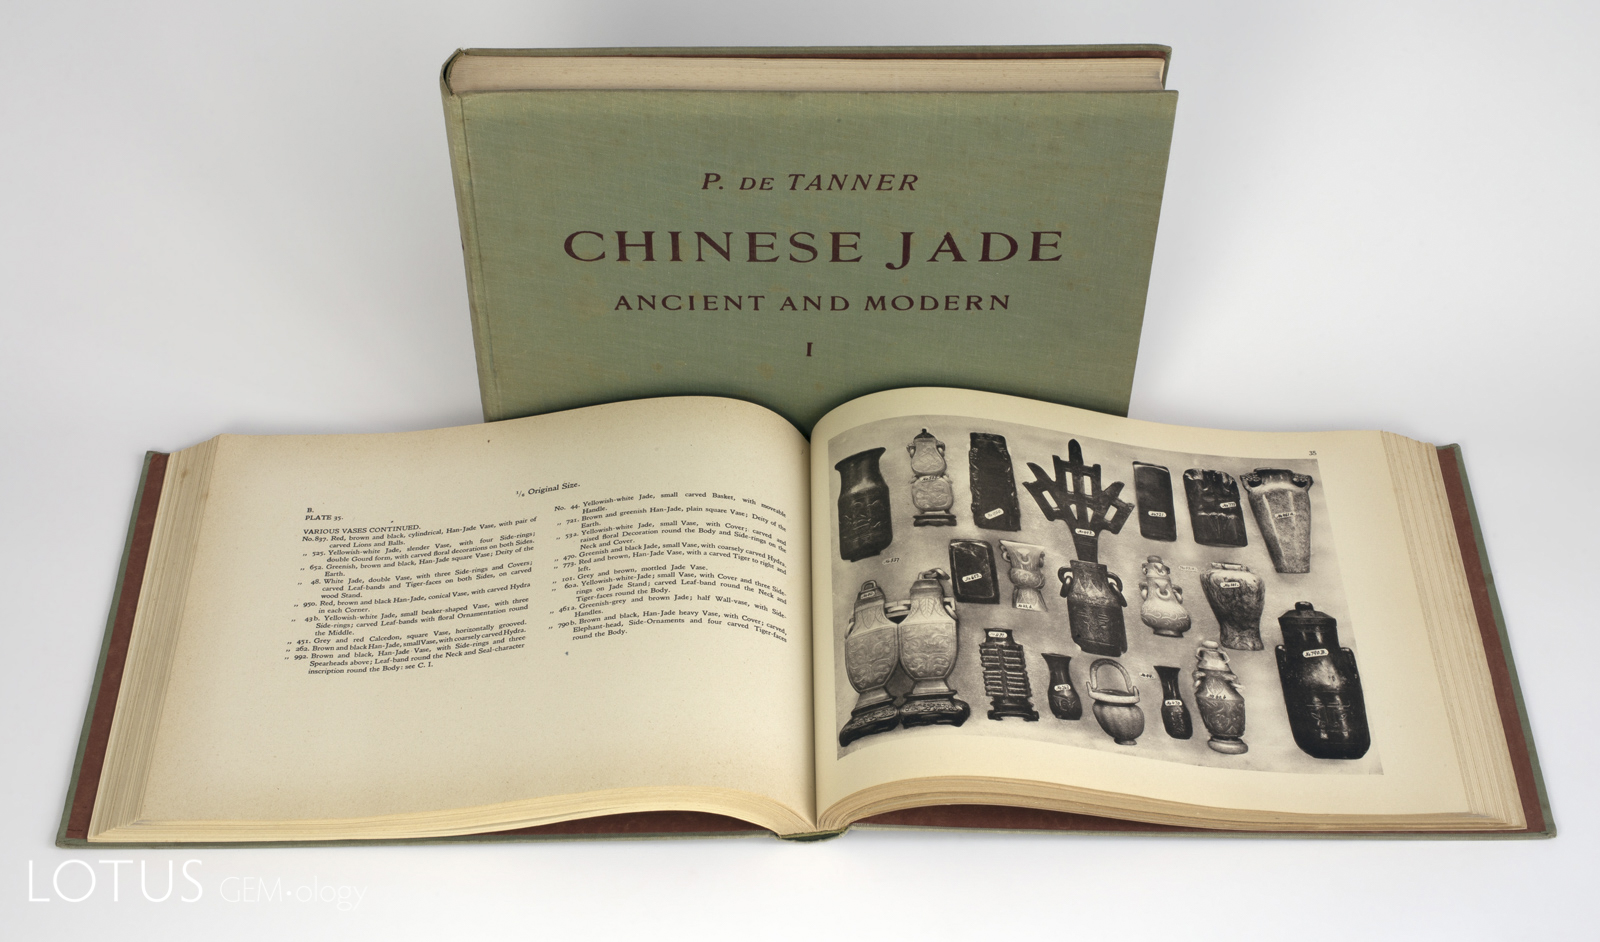 The two-volume 1925 de Tanner set, Chinese Jade: Ancient and Modern, is one of the most collectable books on jade